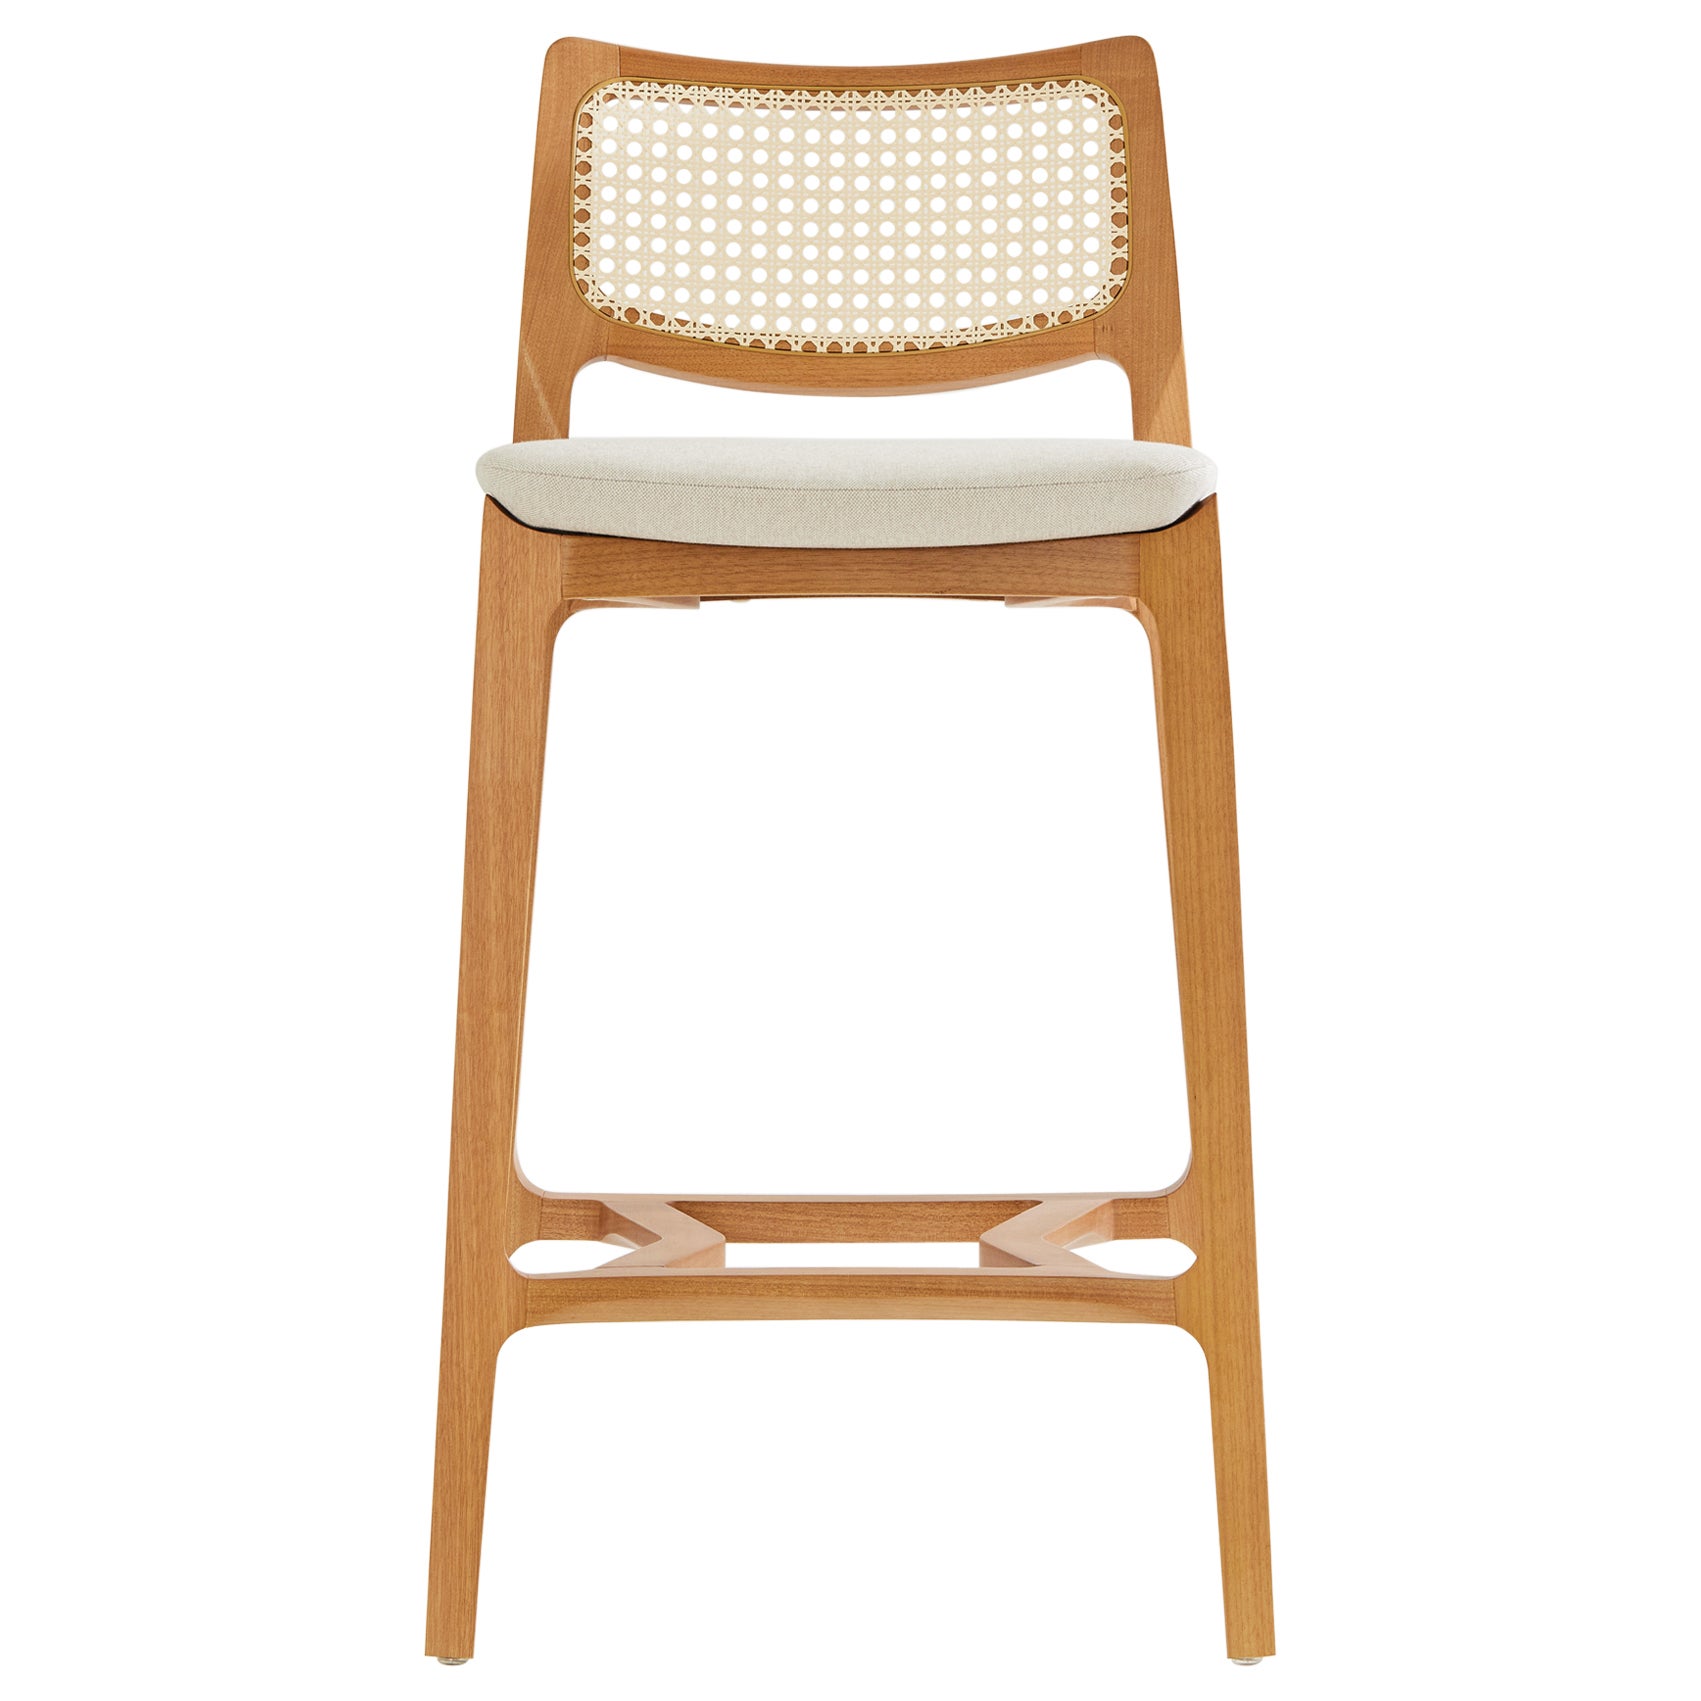 Aurora stool, light honey solid wood, natural caning back, cream textile seating For Sale